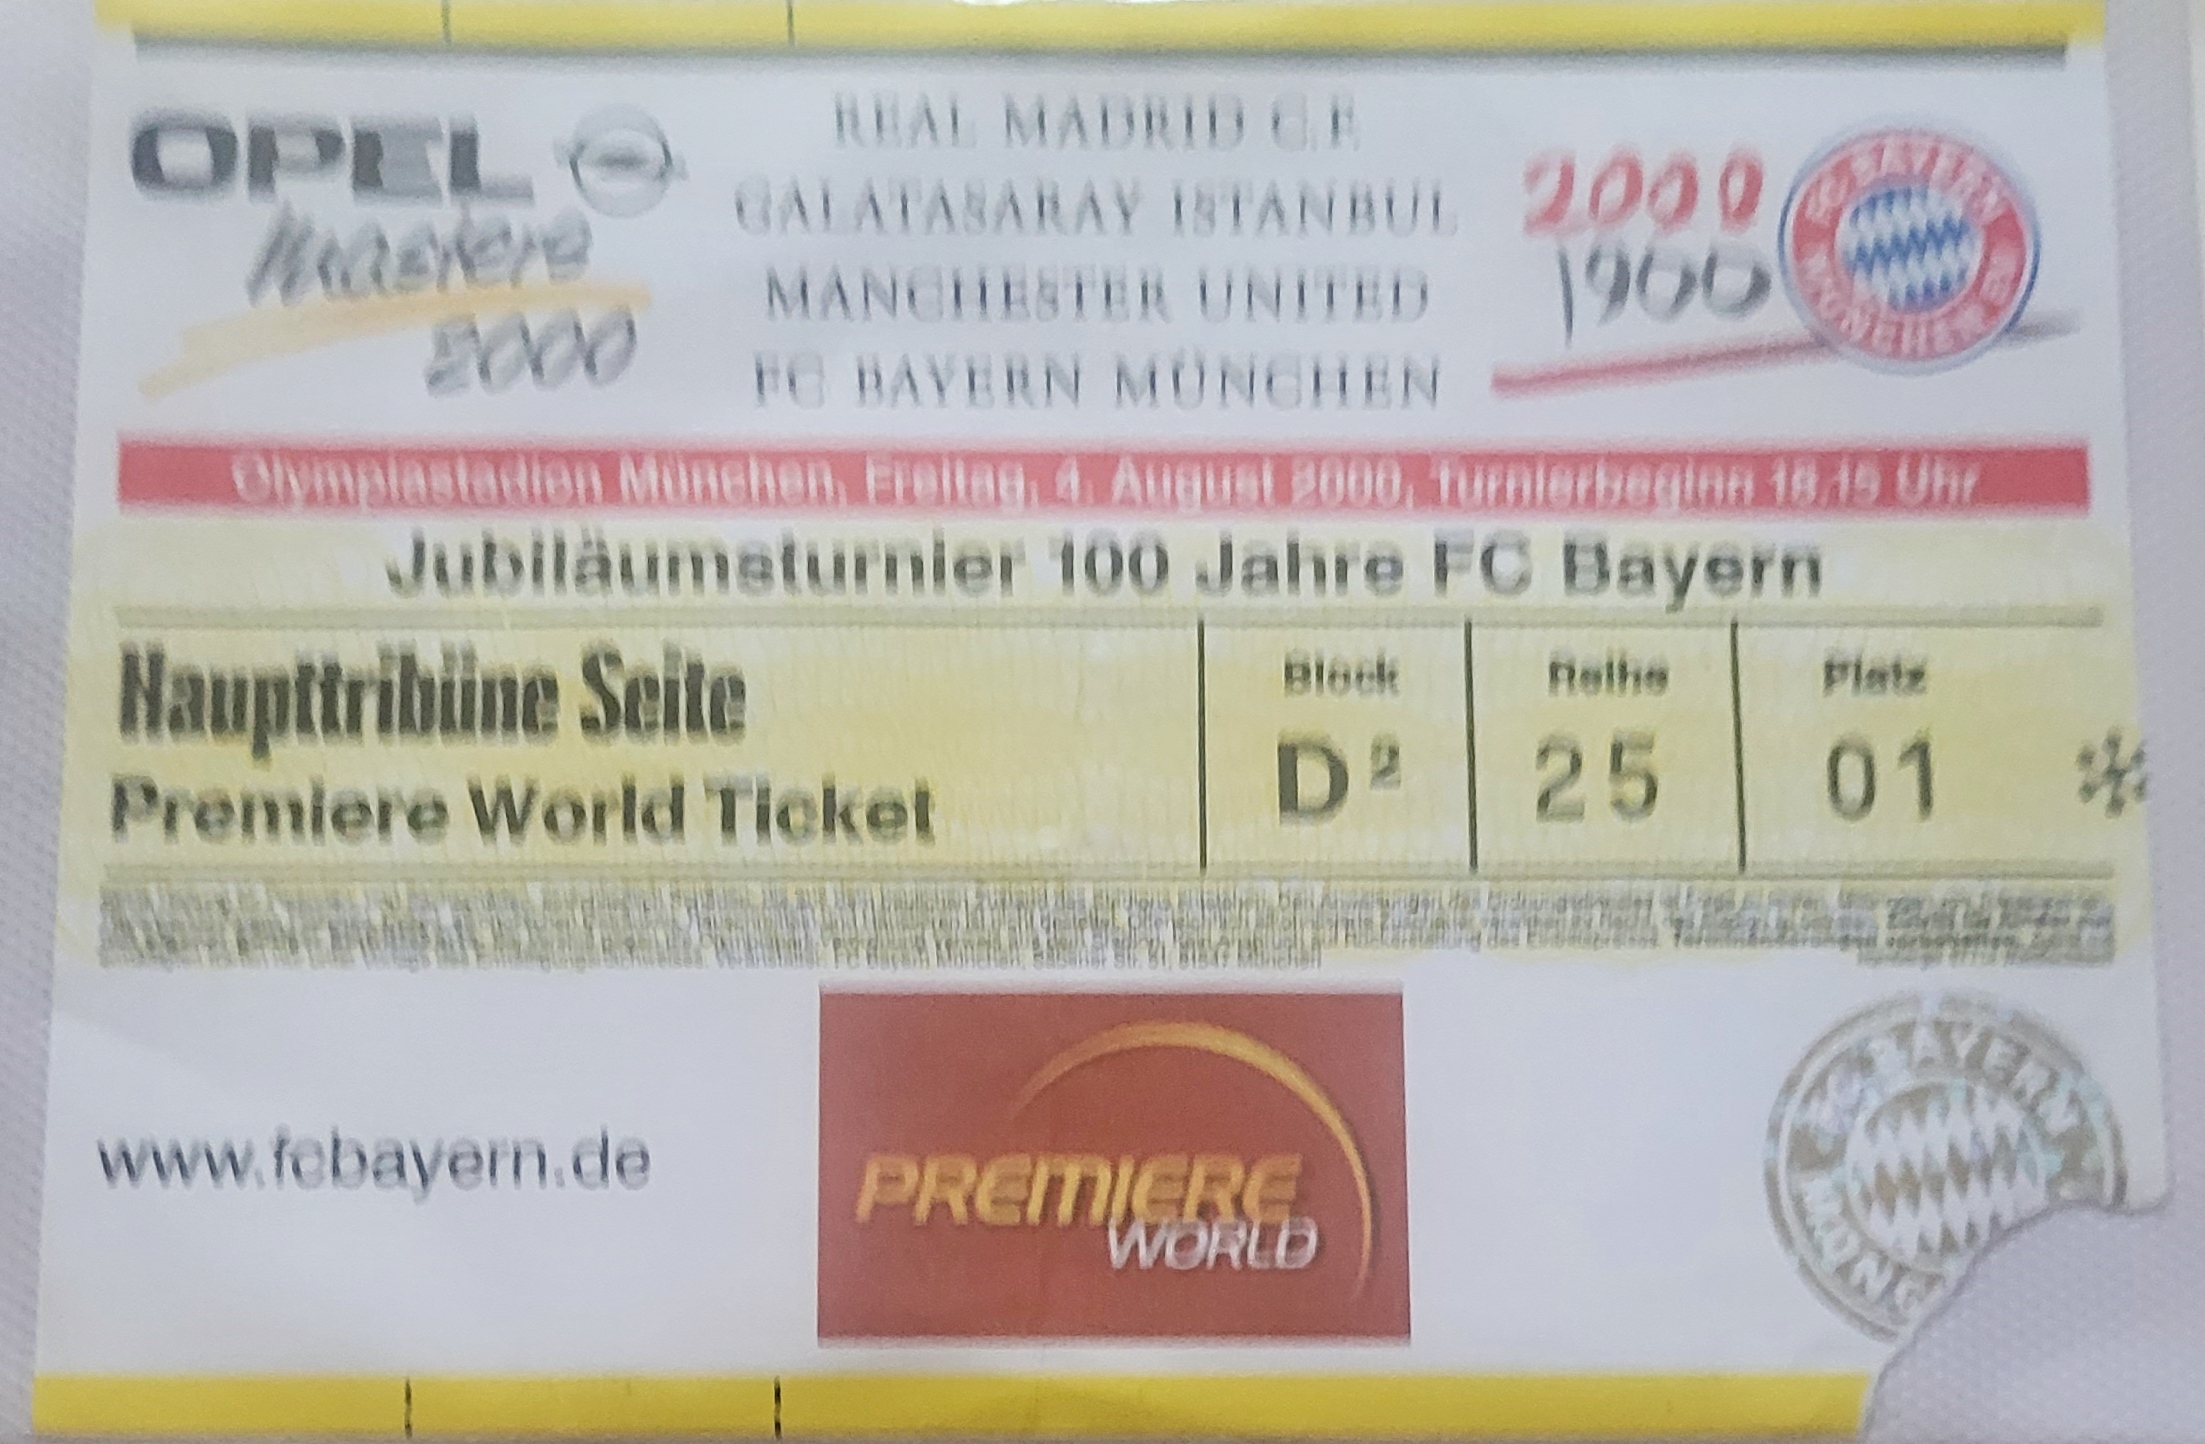 2000 REAL MADRID V MANCHESTER UNITED OPEL MASTERS TOURNAMENT PLAYED IN GERMANY TICKET